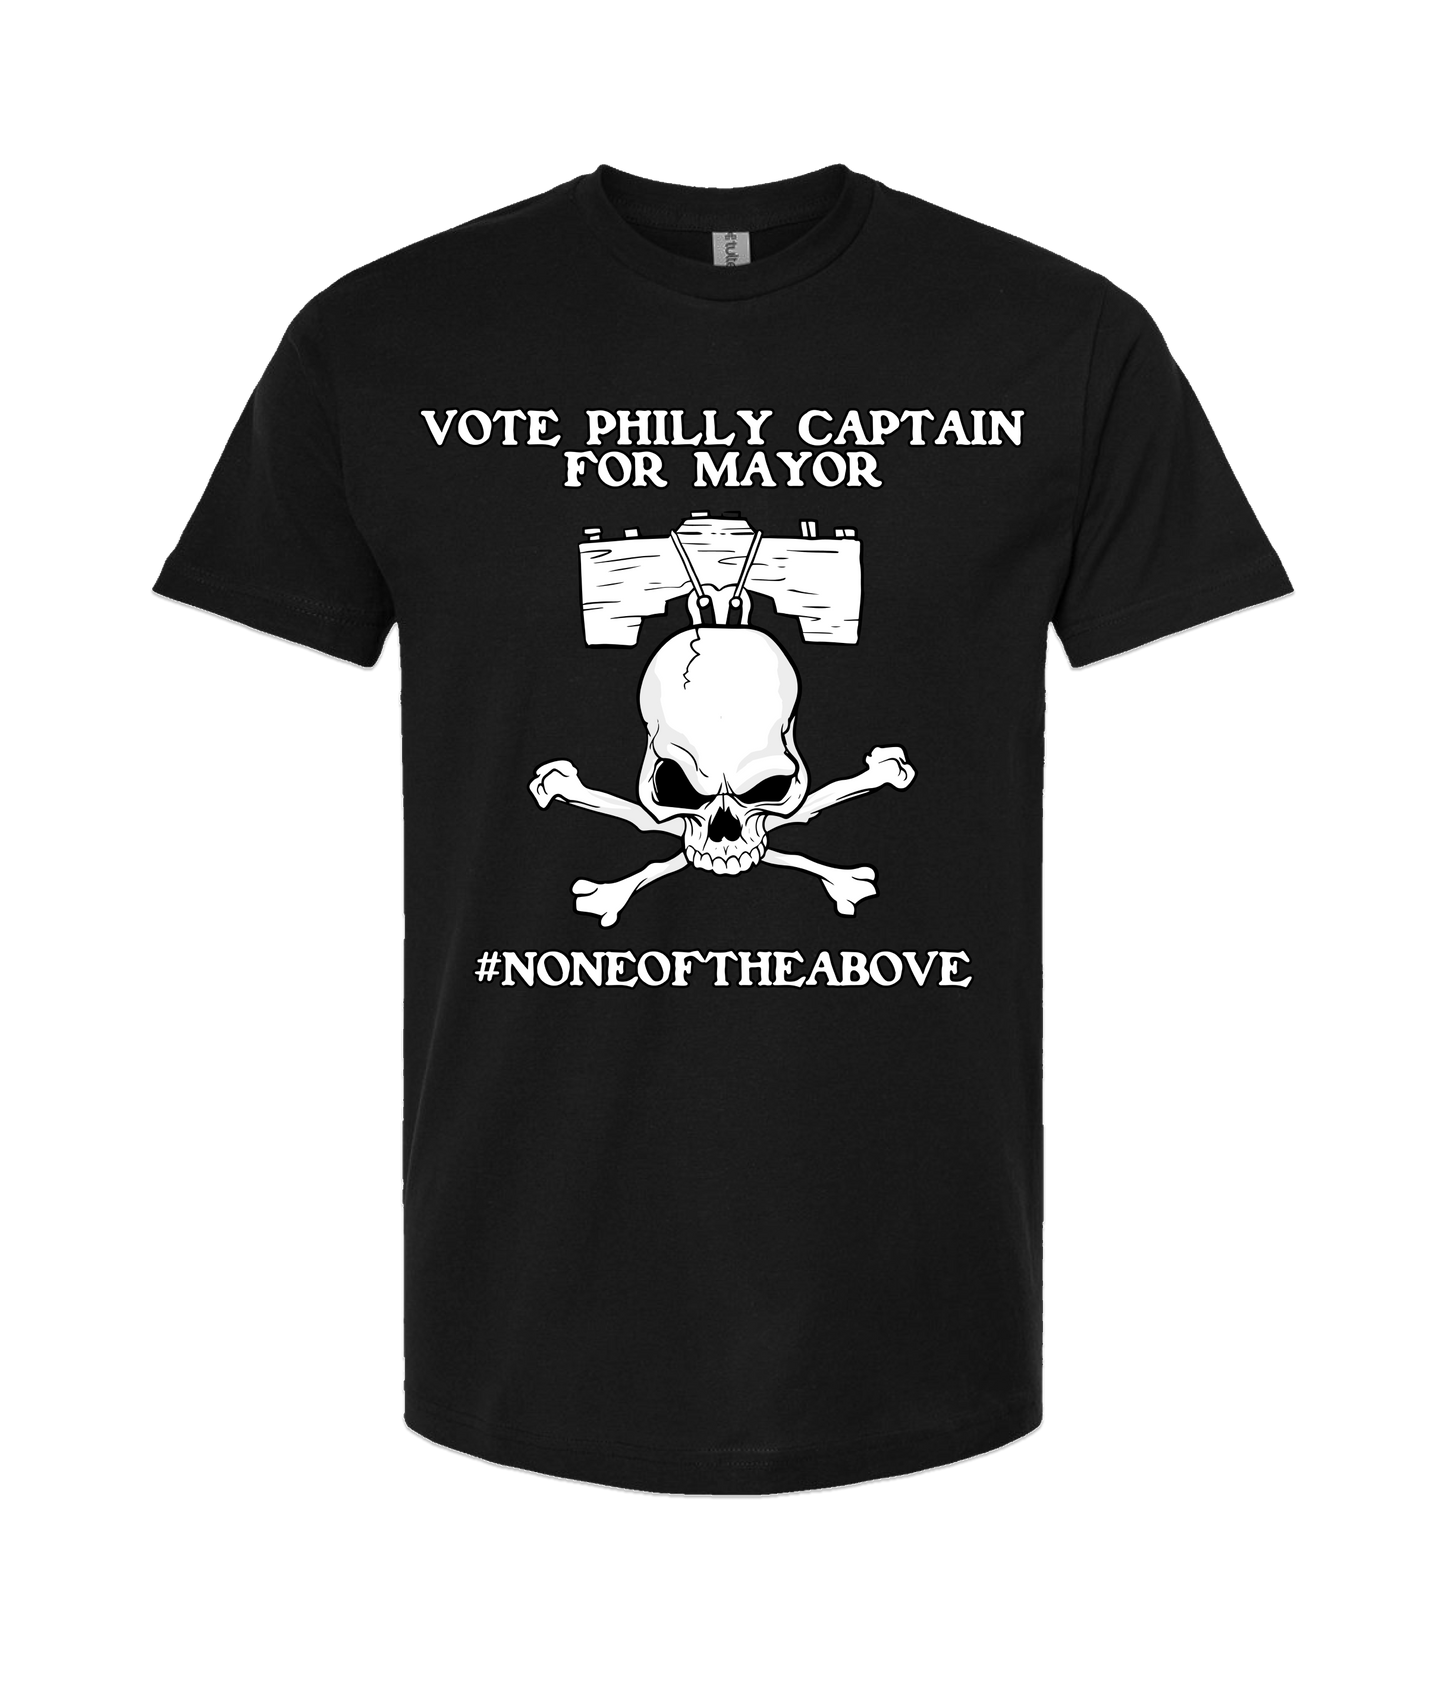 The Philly Captain's Merch is Fire - VOTE - Black T-Shirt